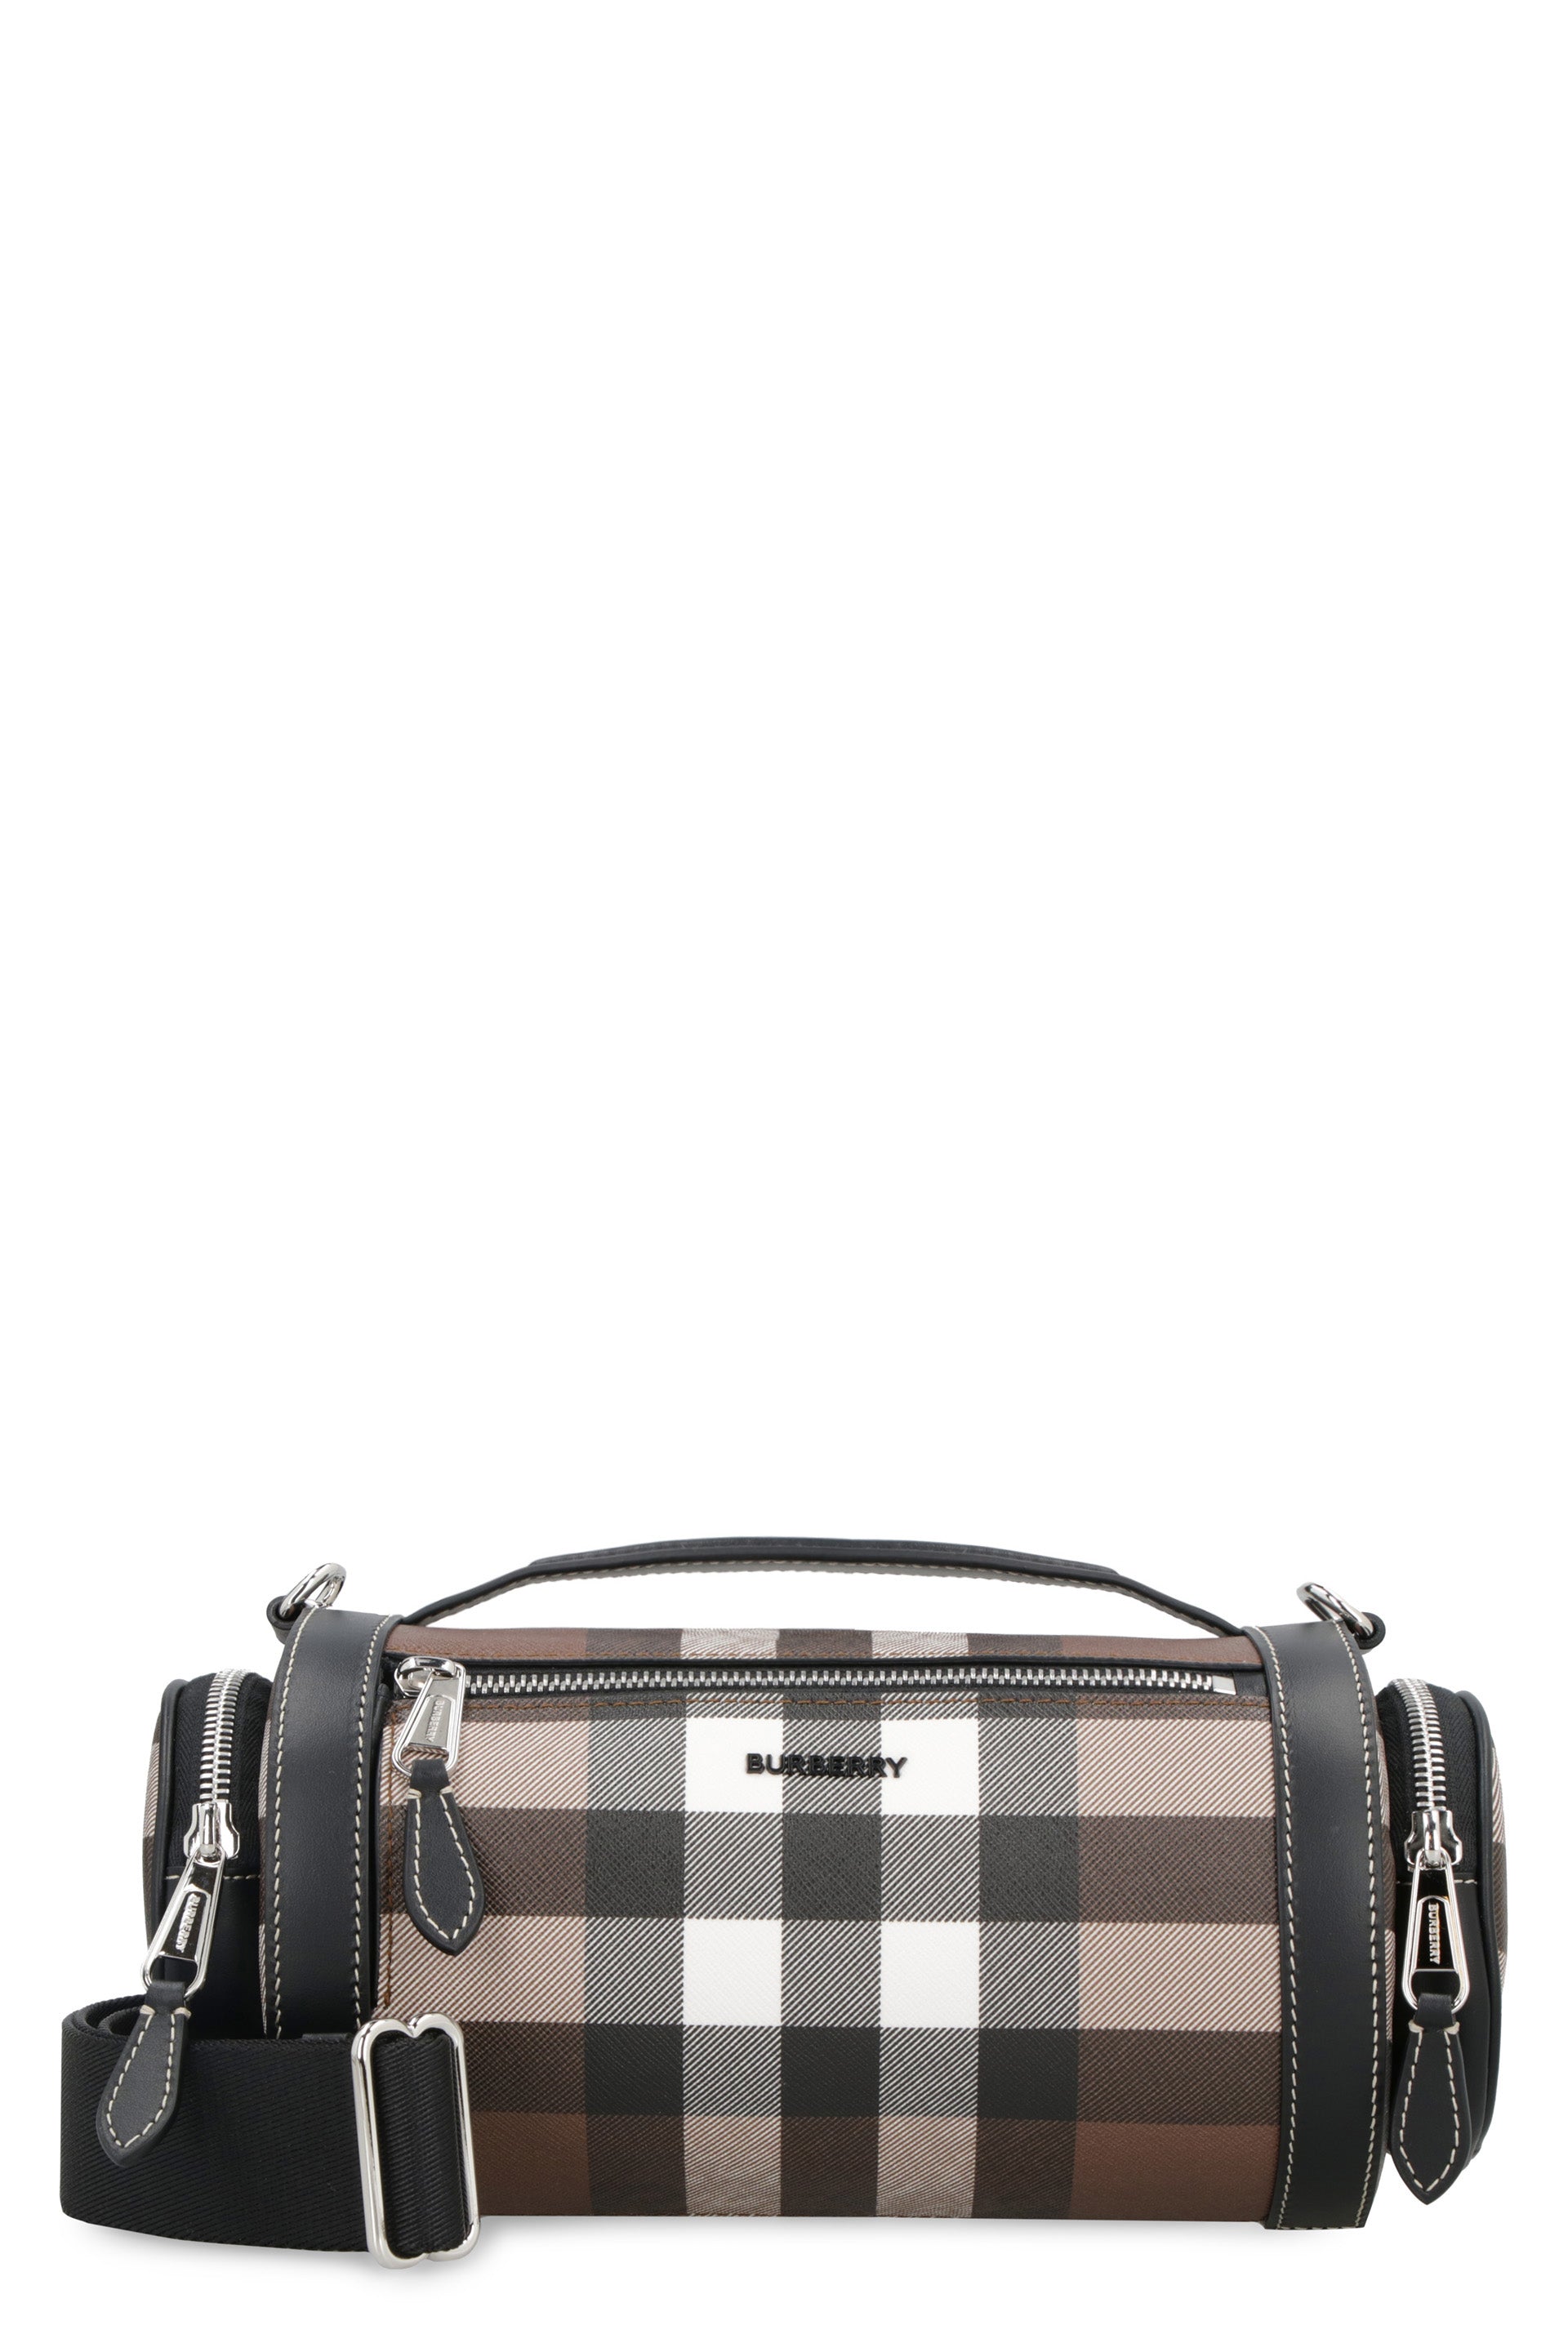 Burberry Canvas And Leather Shoulder Handbag In Brown